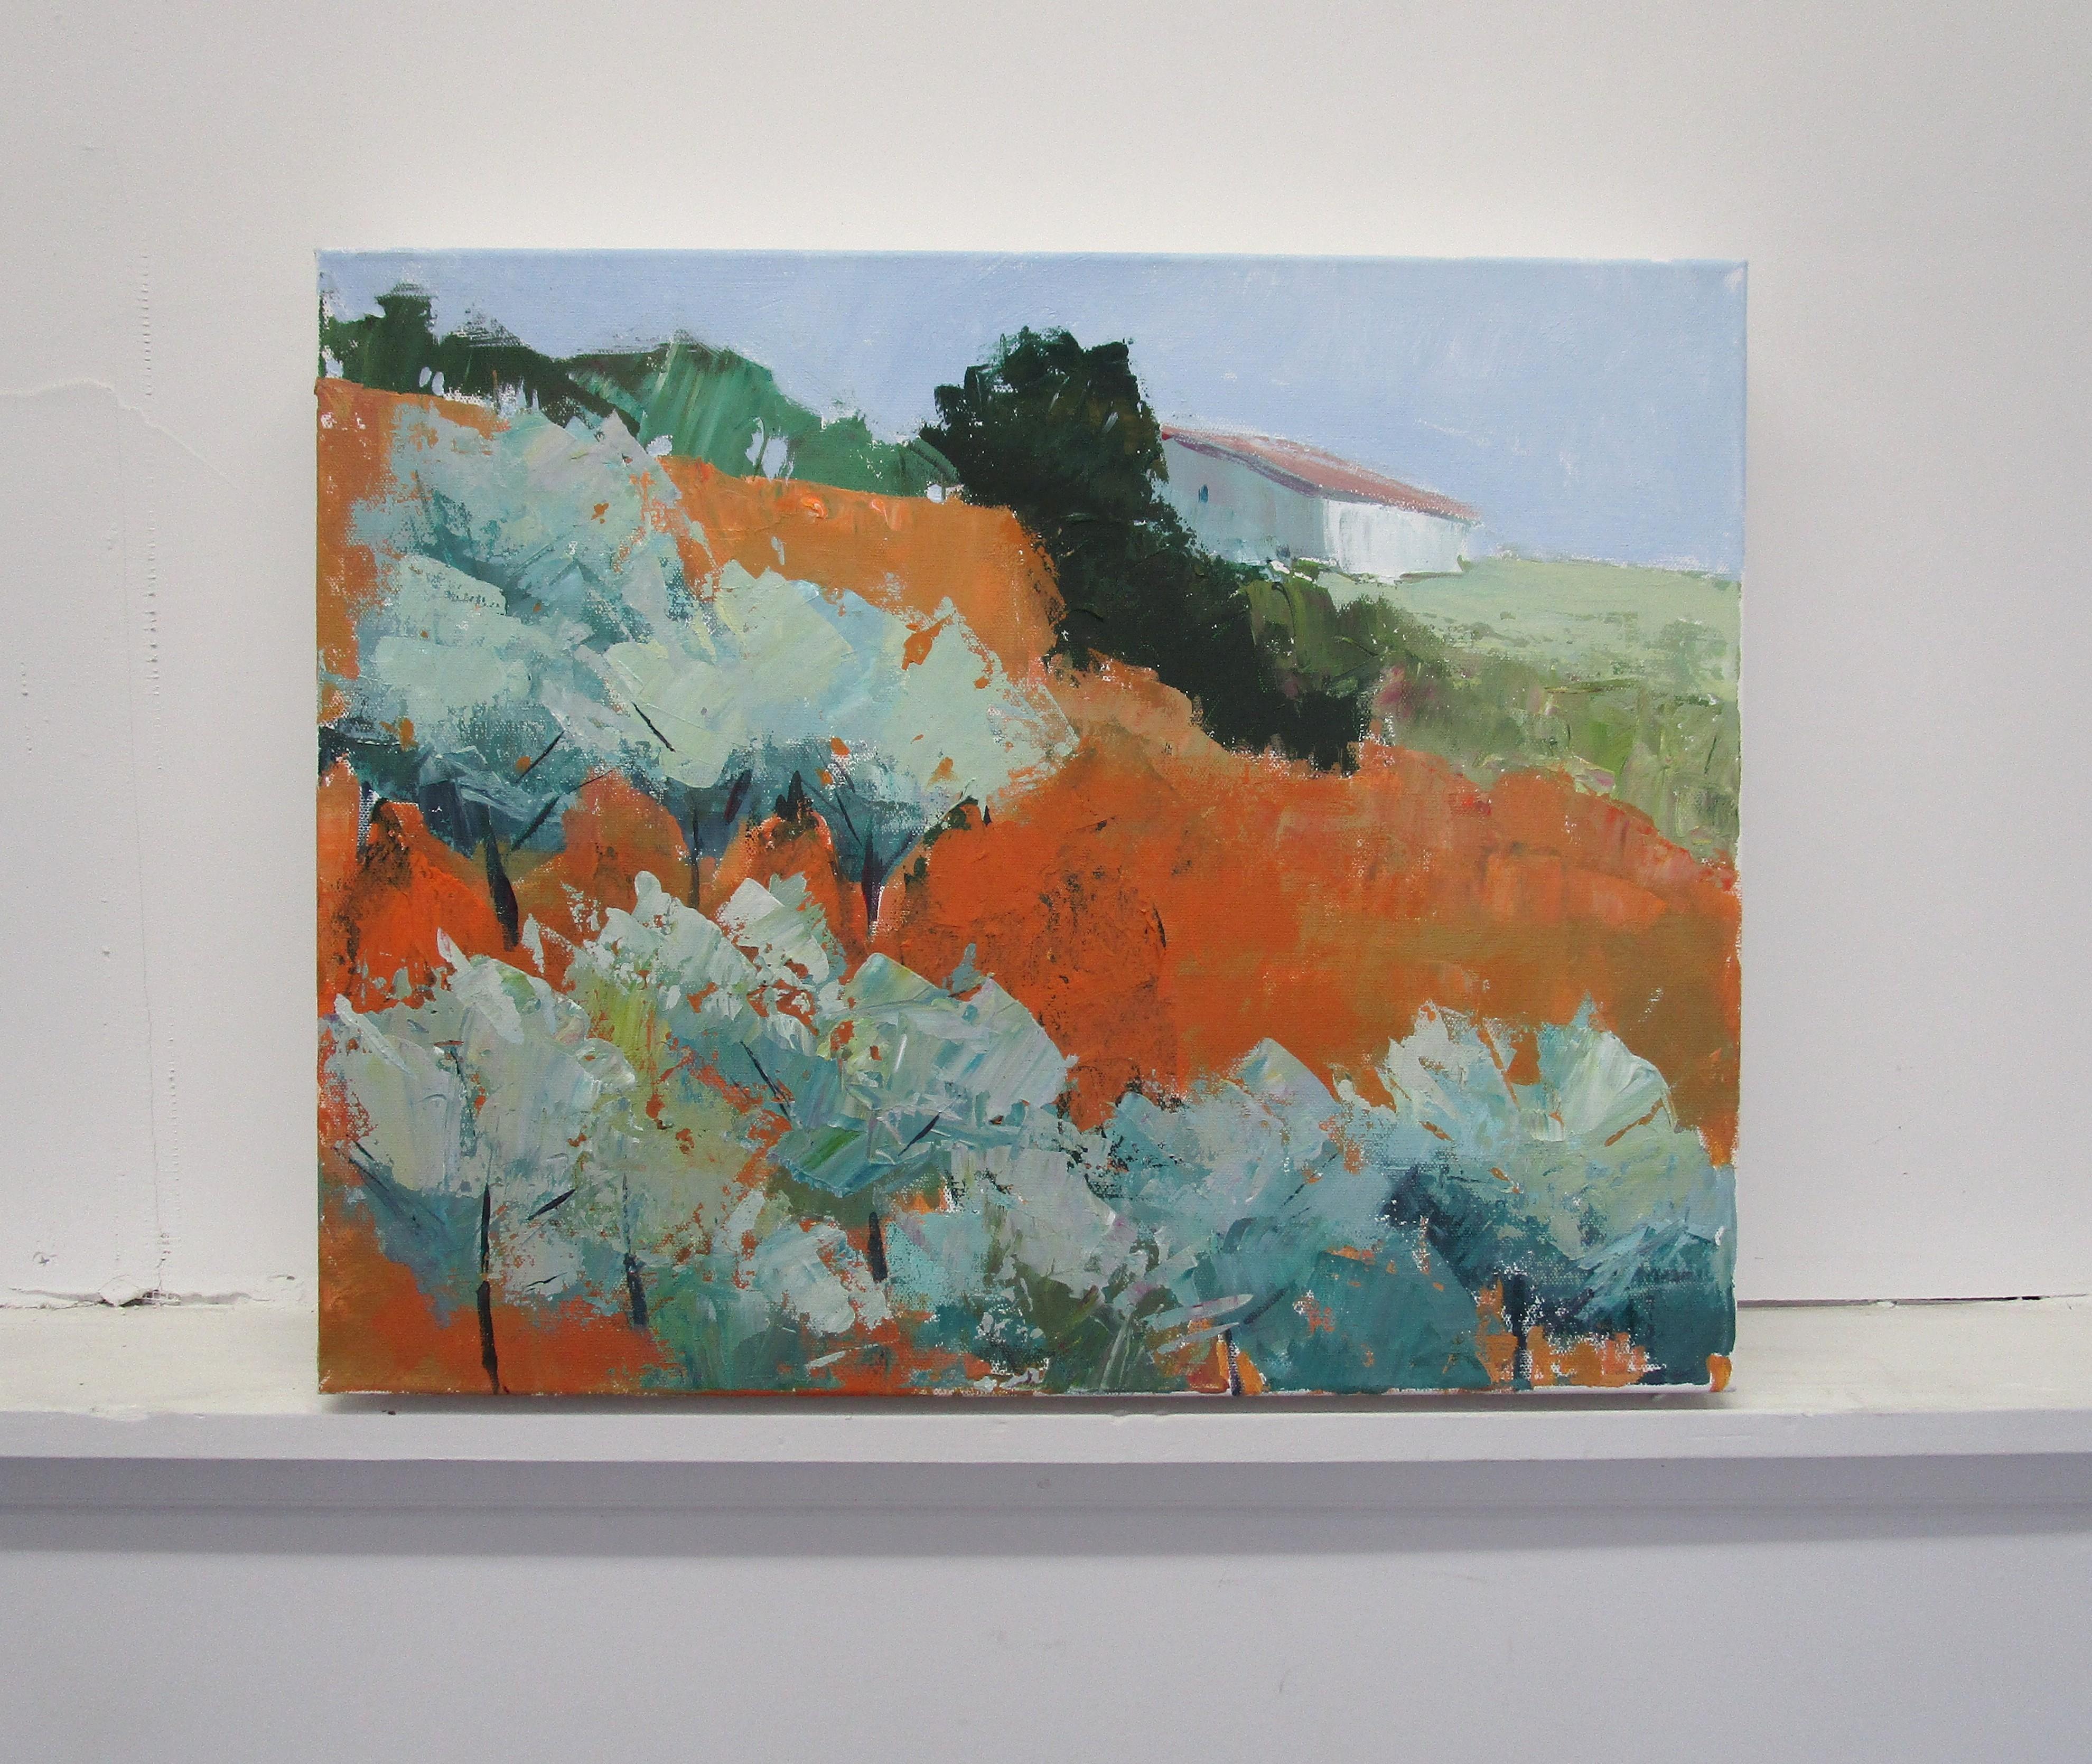 <p>Artist Comments<br />Artist Janet Dyer produced this landscape painting after a month-long stay in Assissi, Italy. She utilized a dynamic but subdued color palette punctuated by luscious tangerine. Old-growth olive trees dot the hillside, with a